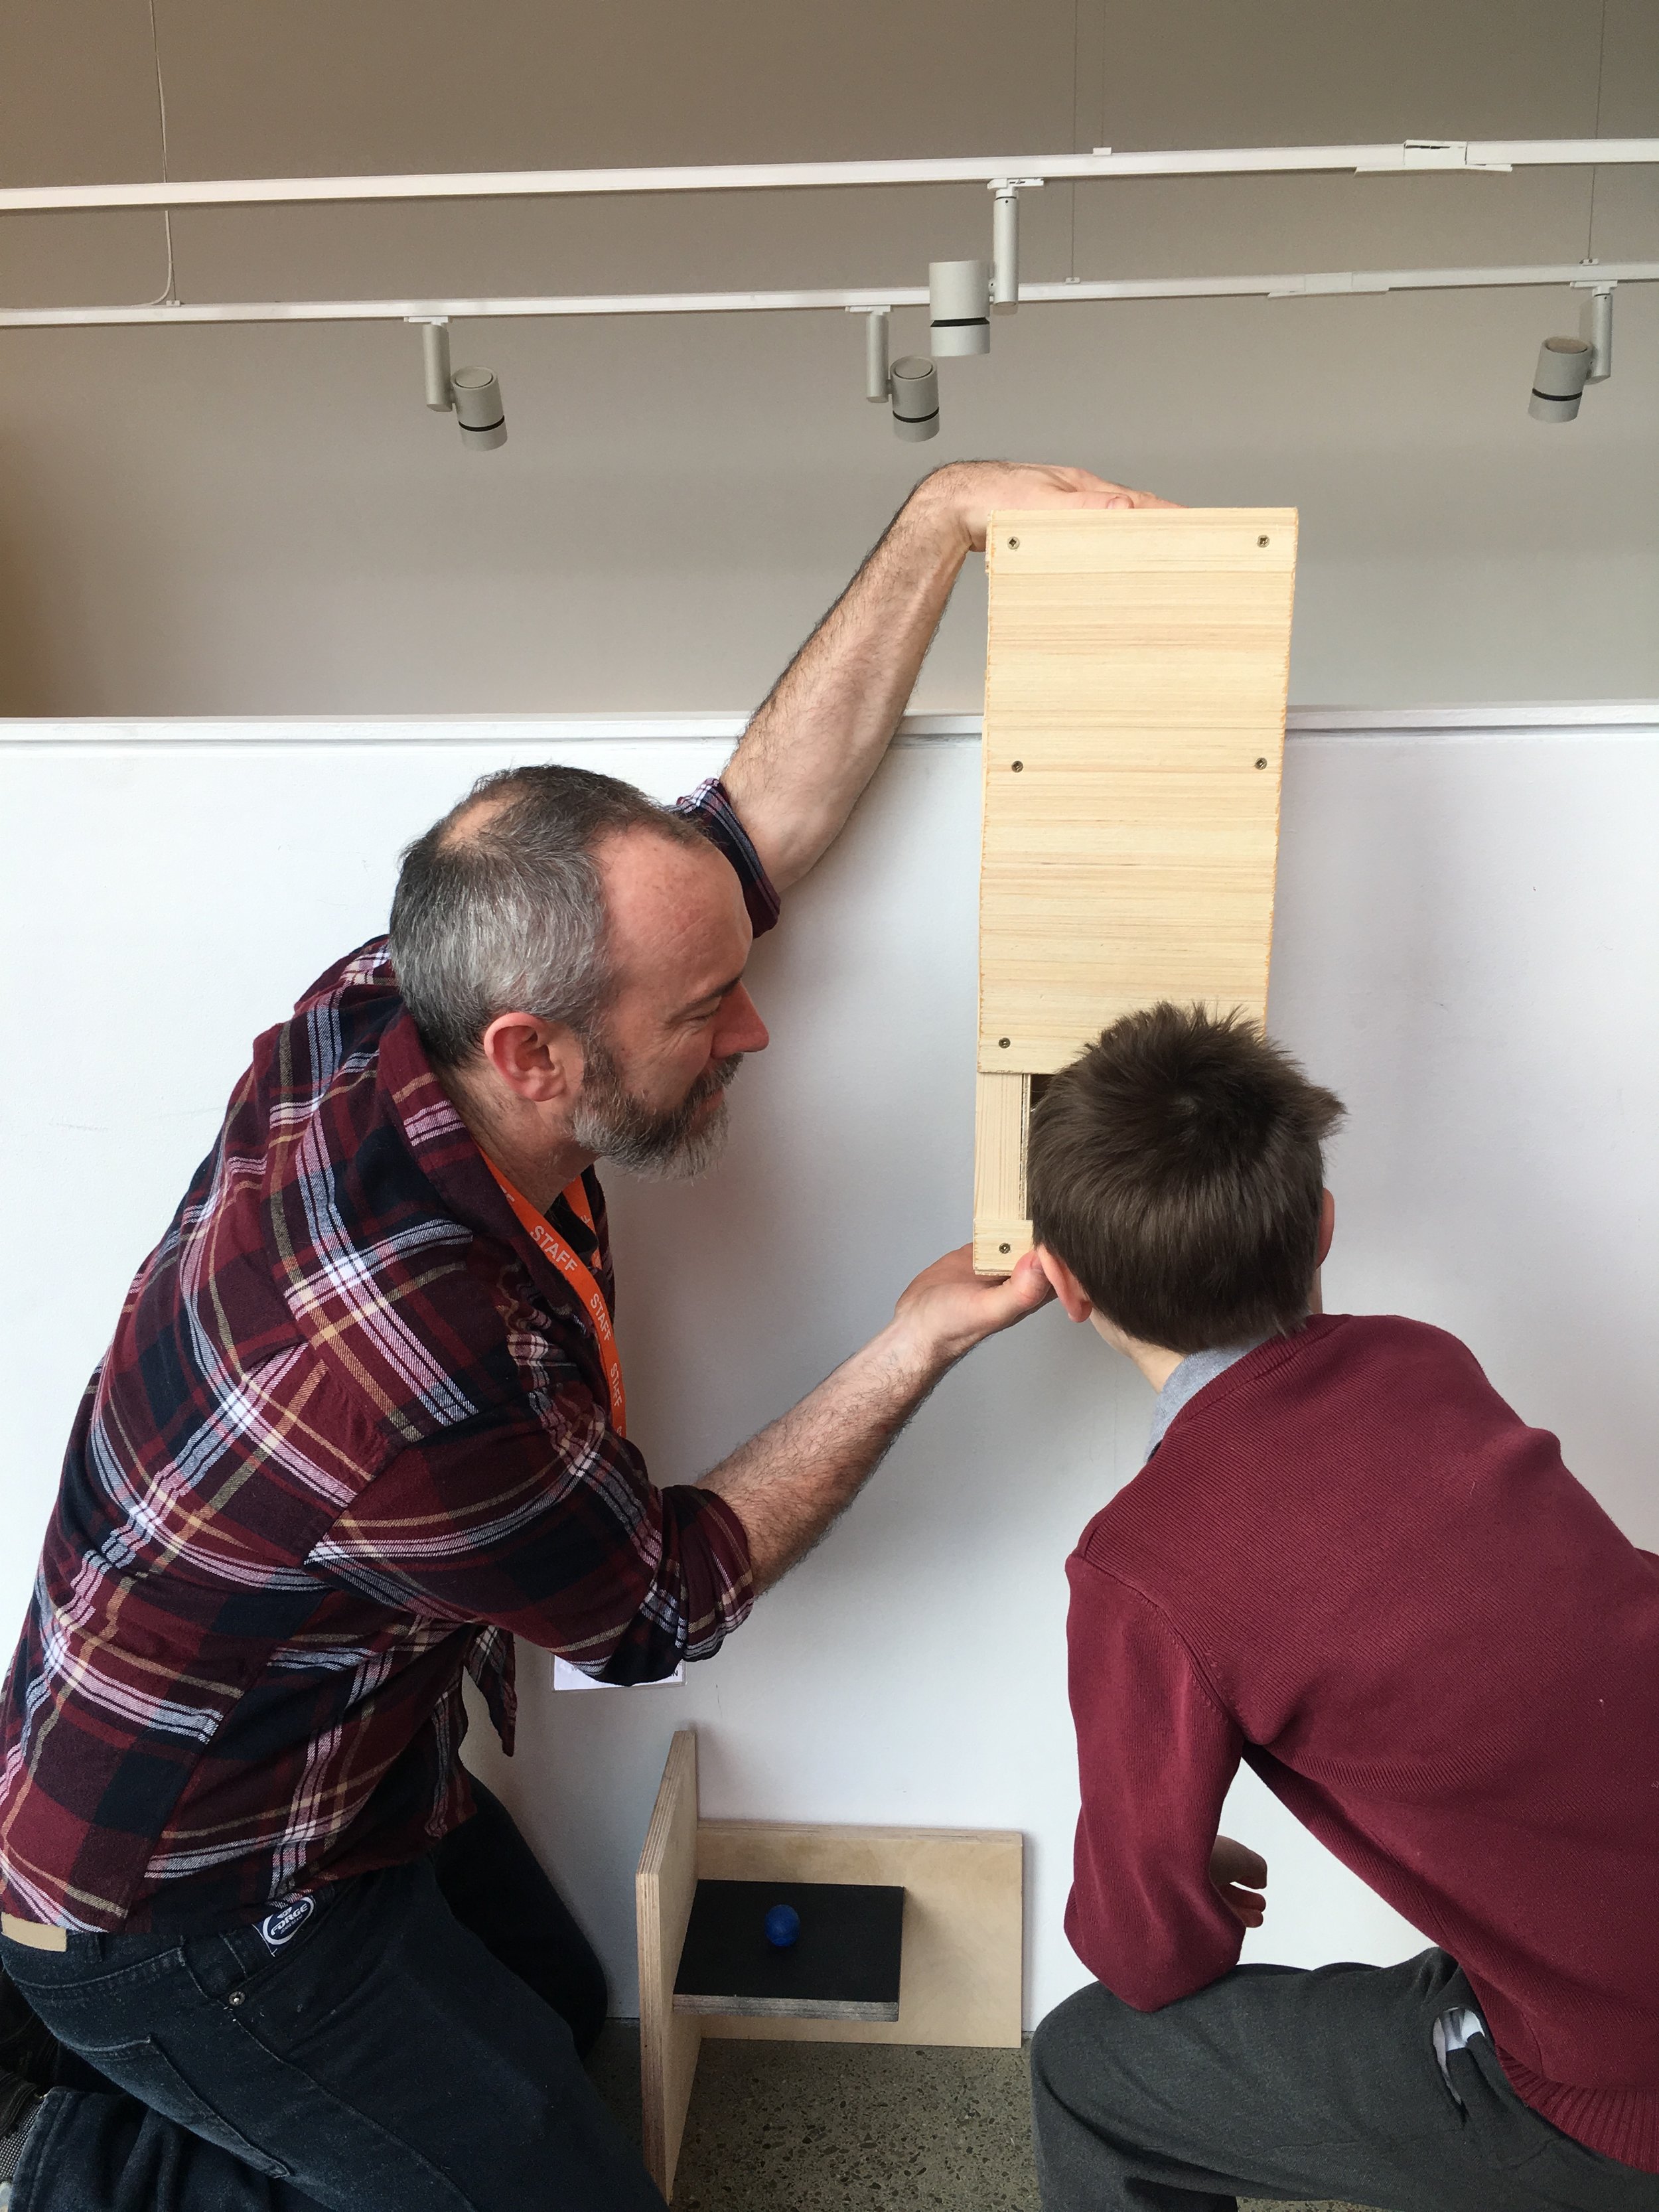  This week they also tested out the periscope. Built by technician Stephen, Siobhan and the students conceived of the periscope as a way for smaller children to see over the balcony. 